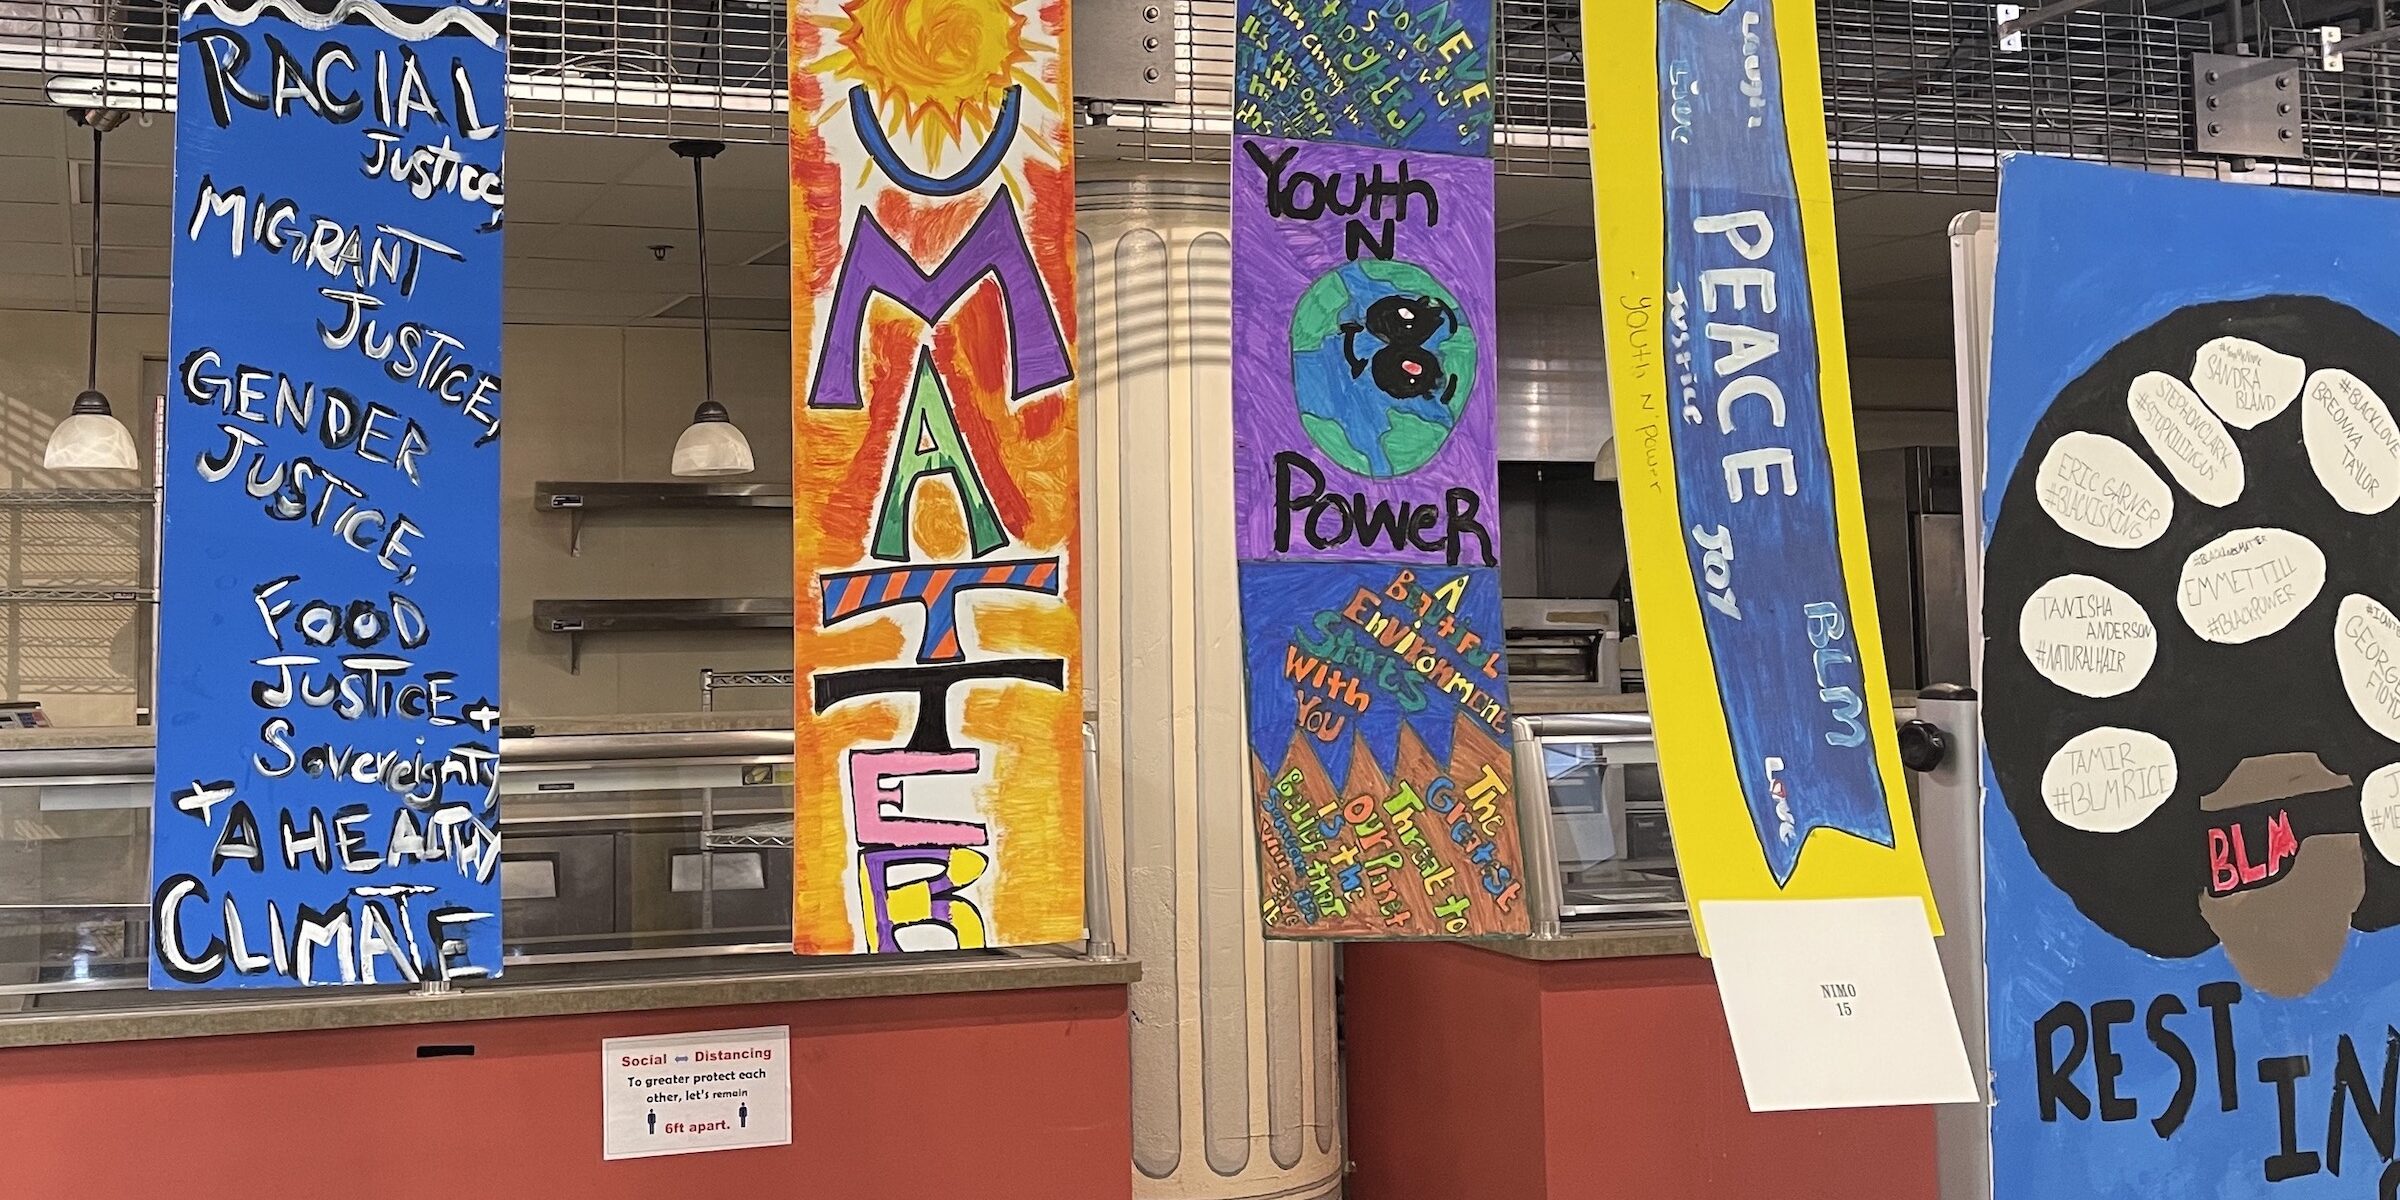 Youth 'n Power Murals at Midtown Global Market February 2021